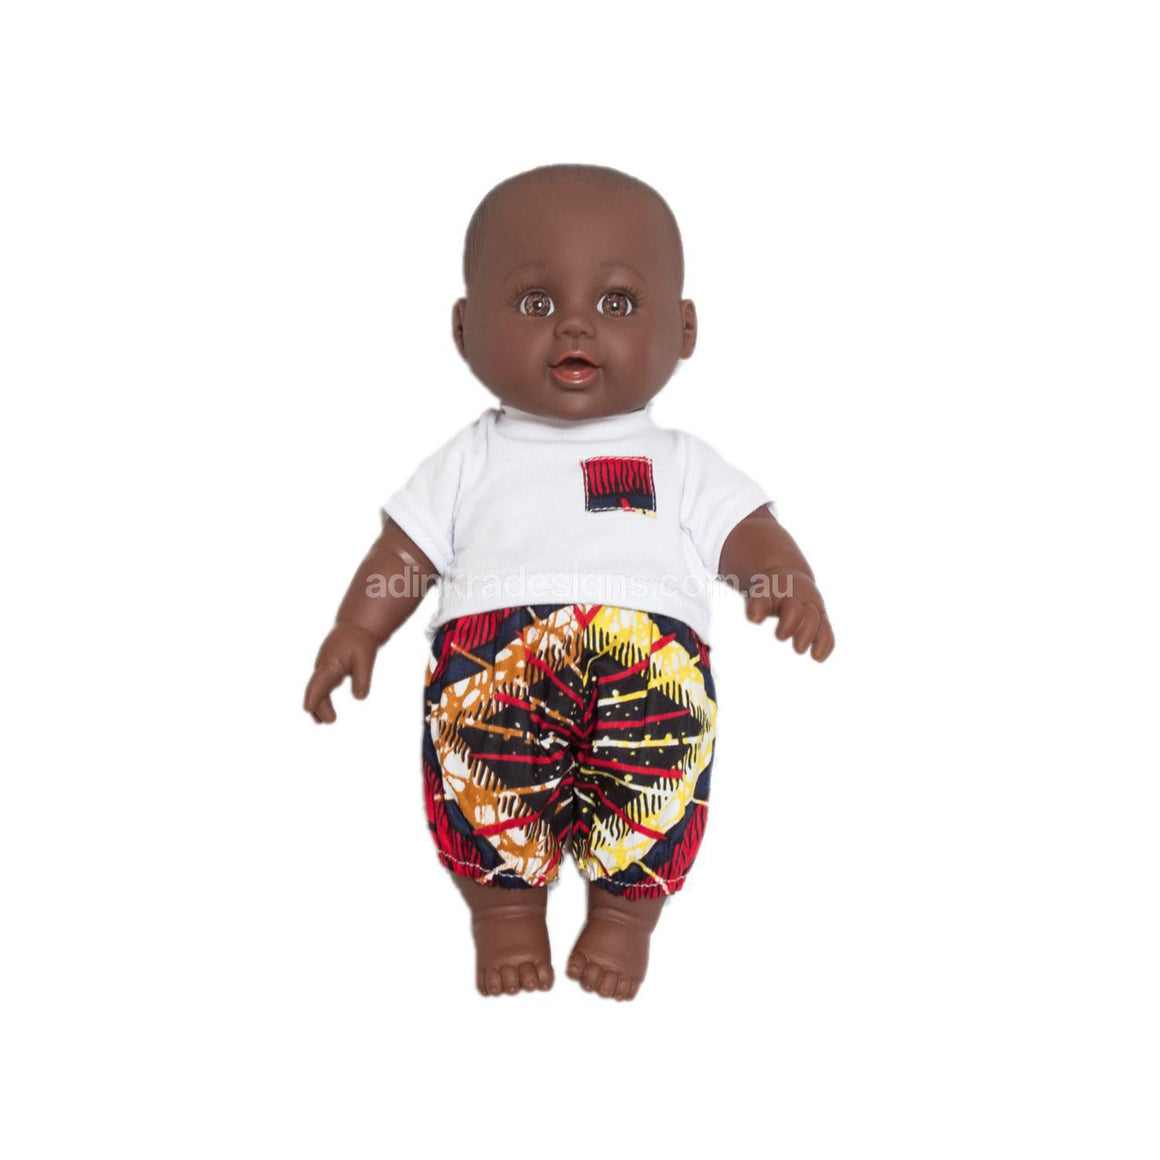 Fair trade African doll for charity Adinkra Project